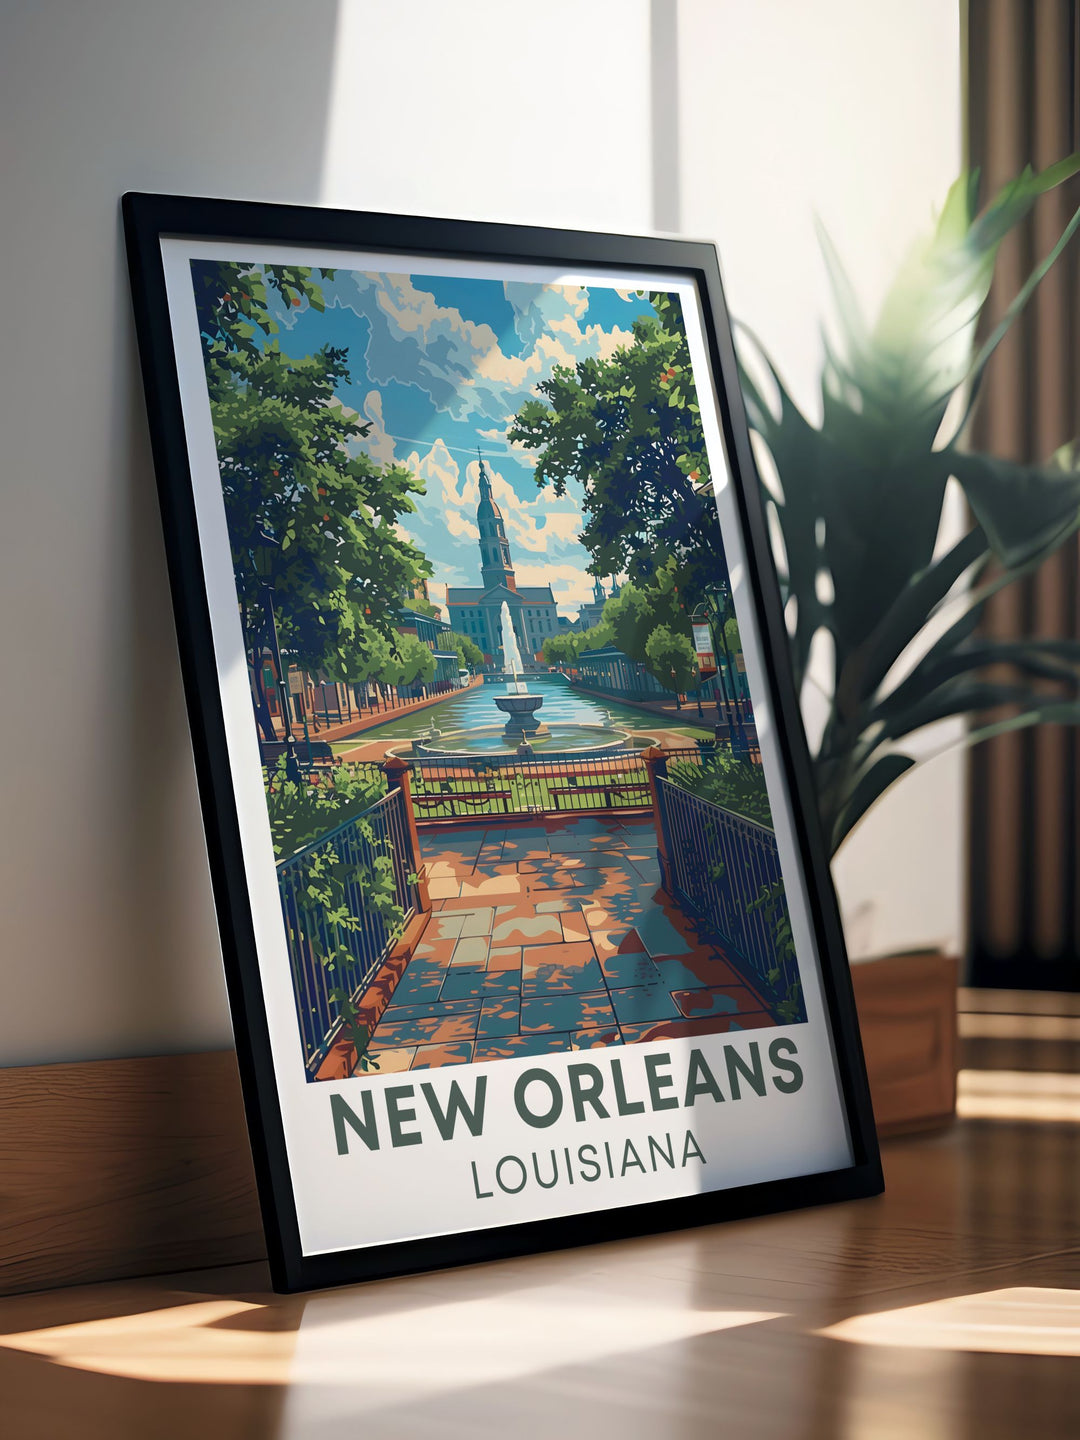 Stunning Jackson Square poster highlighting the charm and history of New Orleans making it a great addition to any Louisiana wall art collection and a wonderful gift for friends and family who cherish their memories of New Orleans